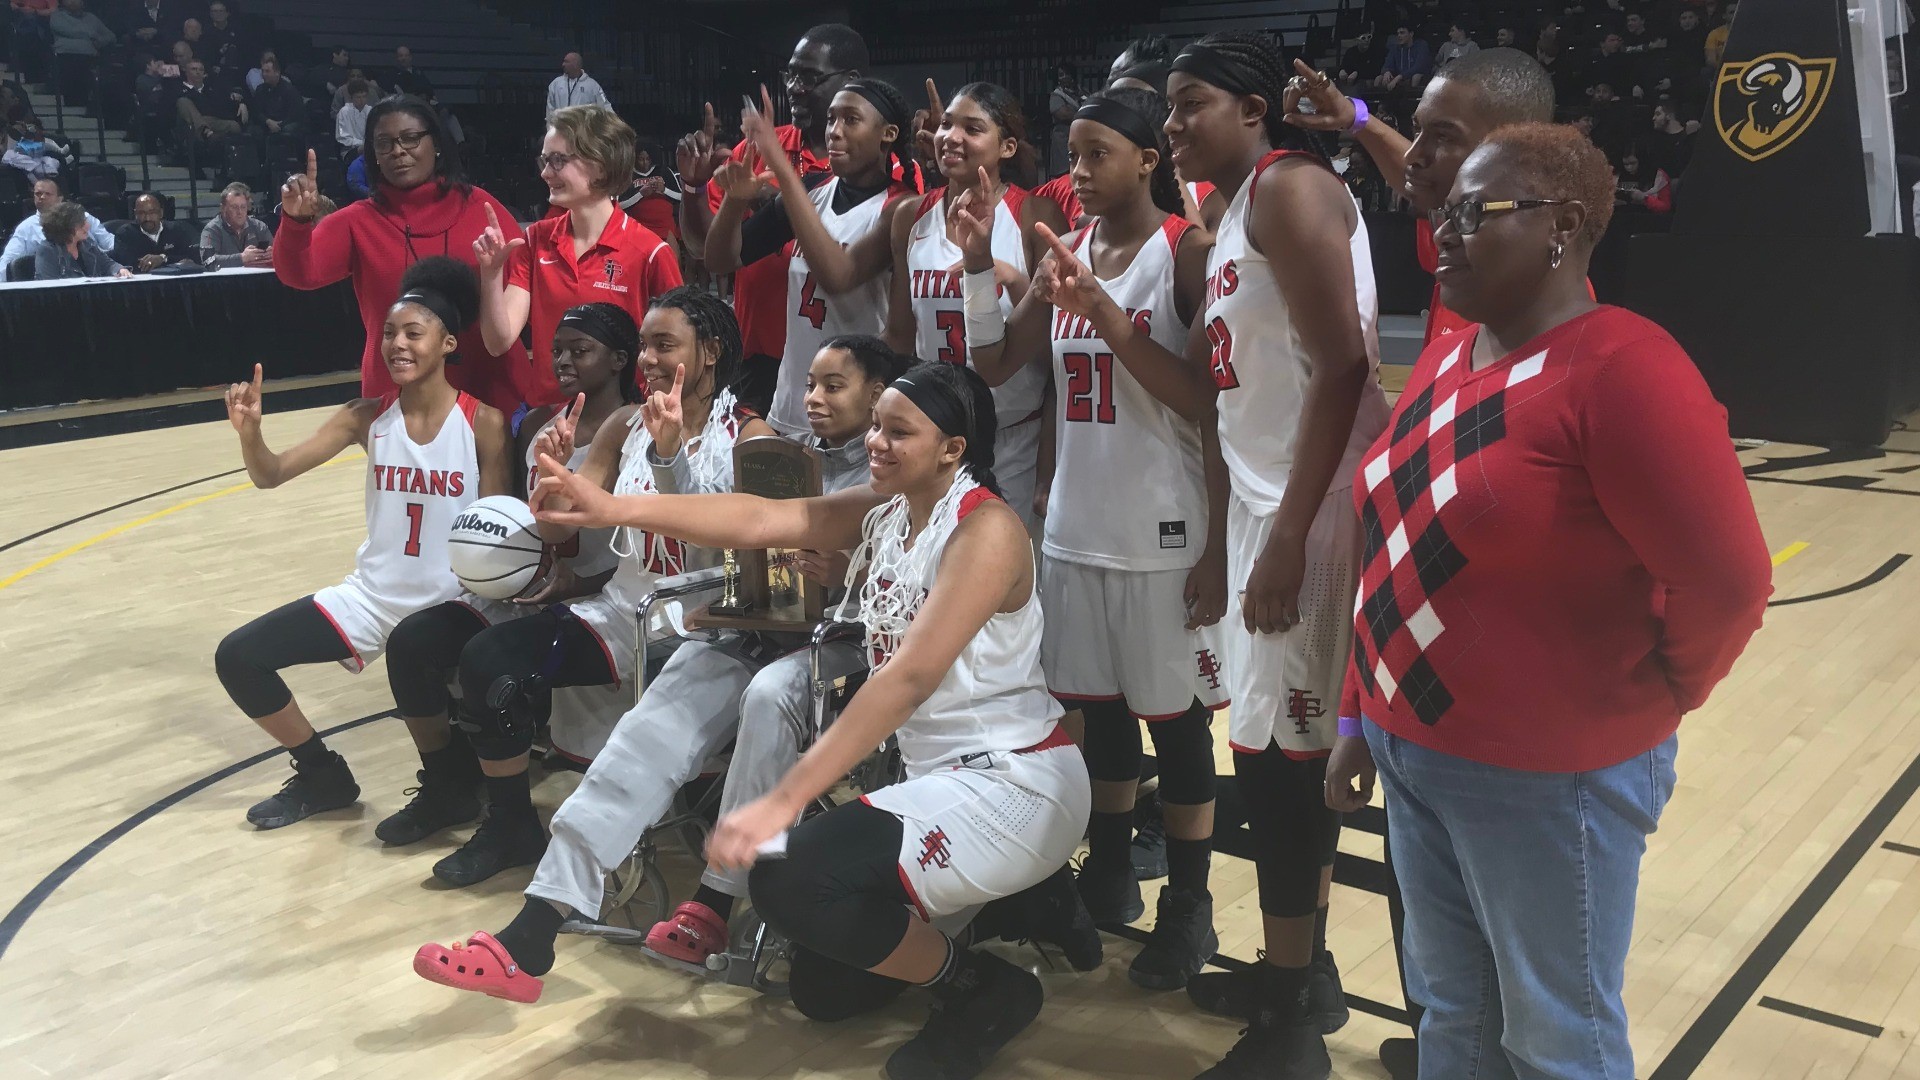 The Titans won their 4th girls basketball state championship by beating Pulaski Co. in the final.